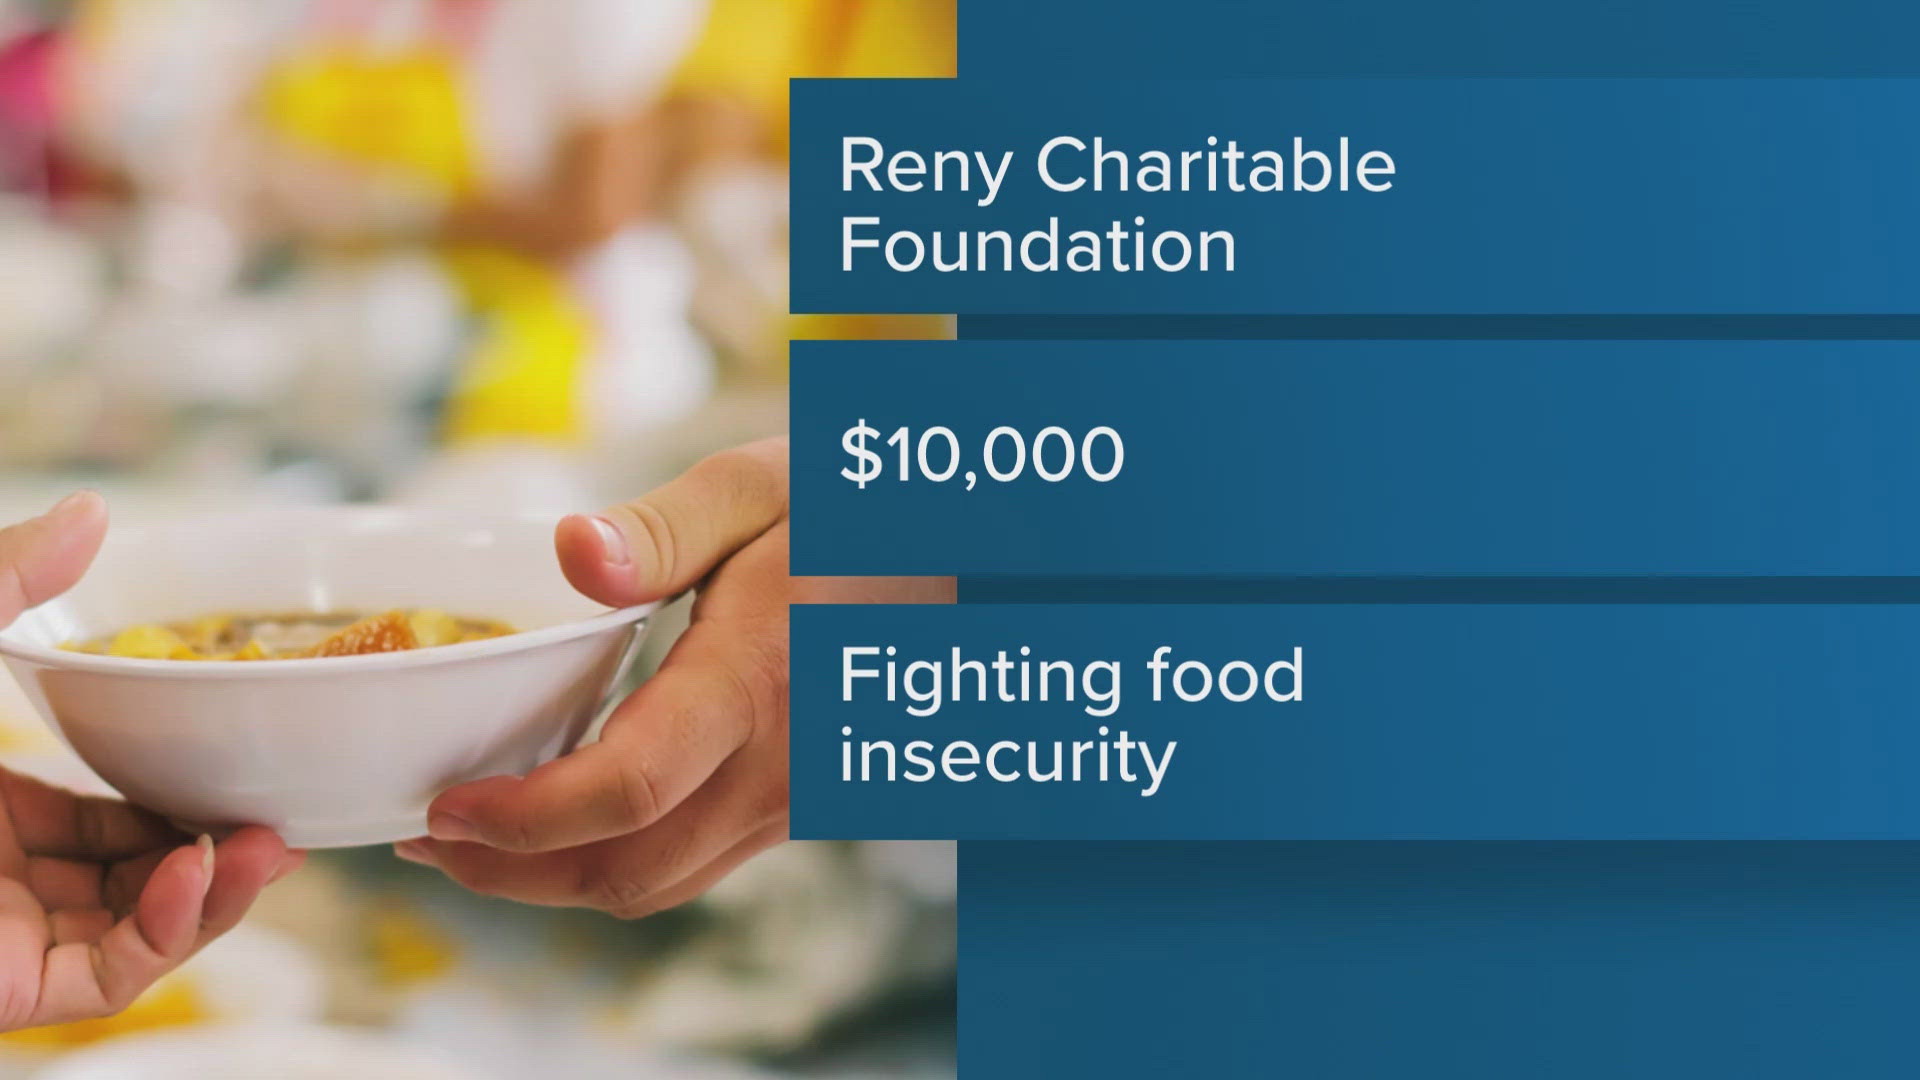 Reny's announced they are making a $10,000 donation to Feed Maine in an effort to help support efforts to combat food insecurity.